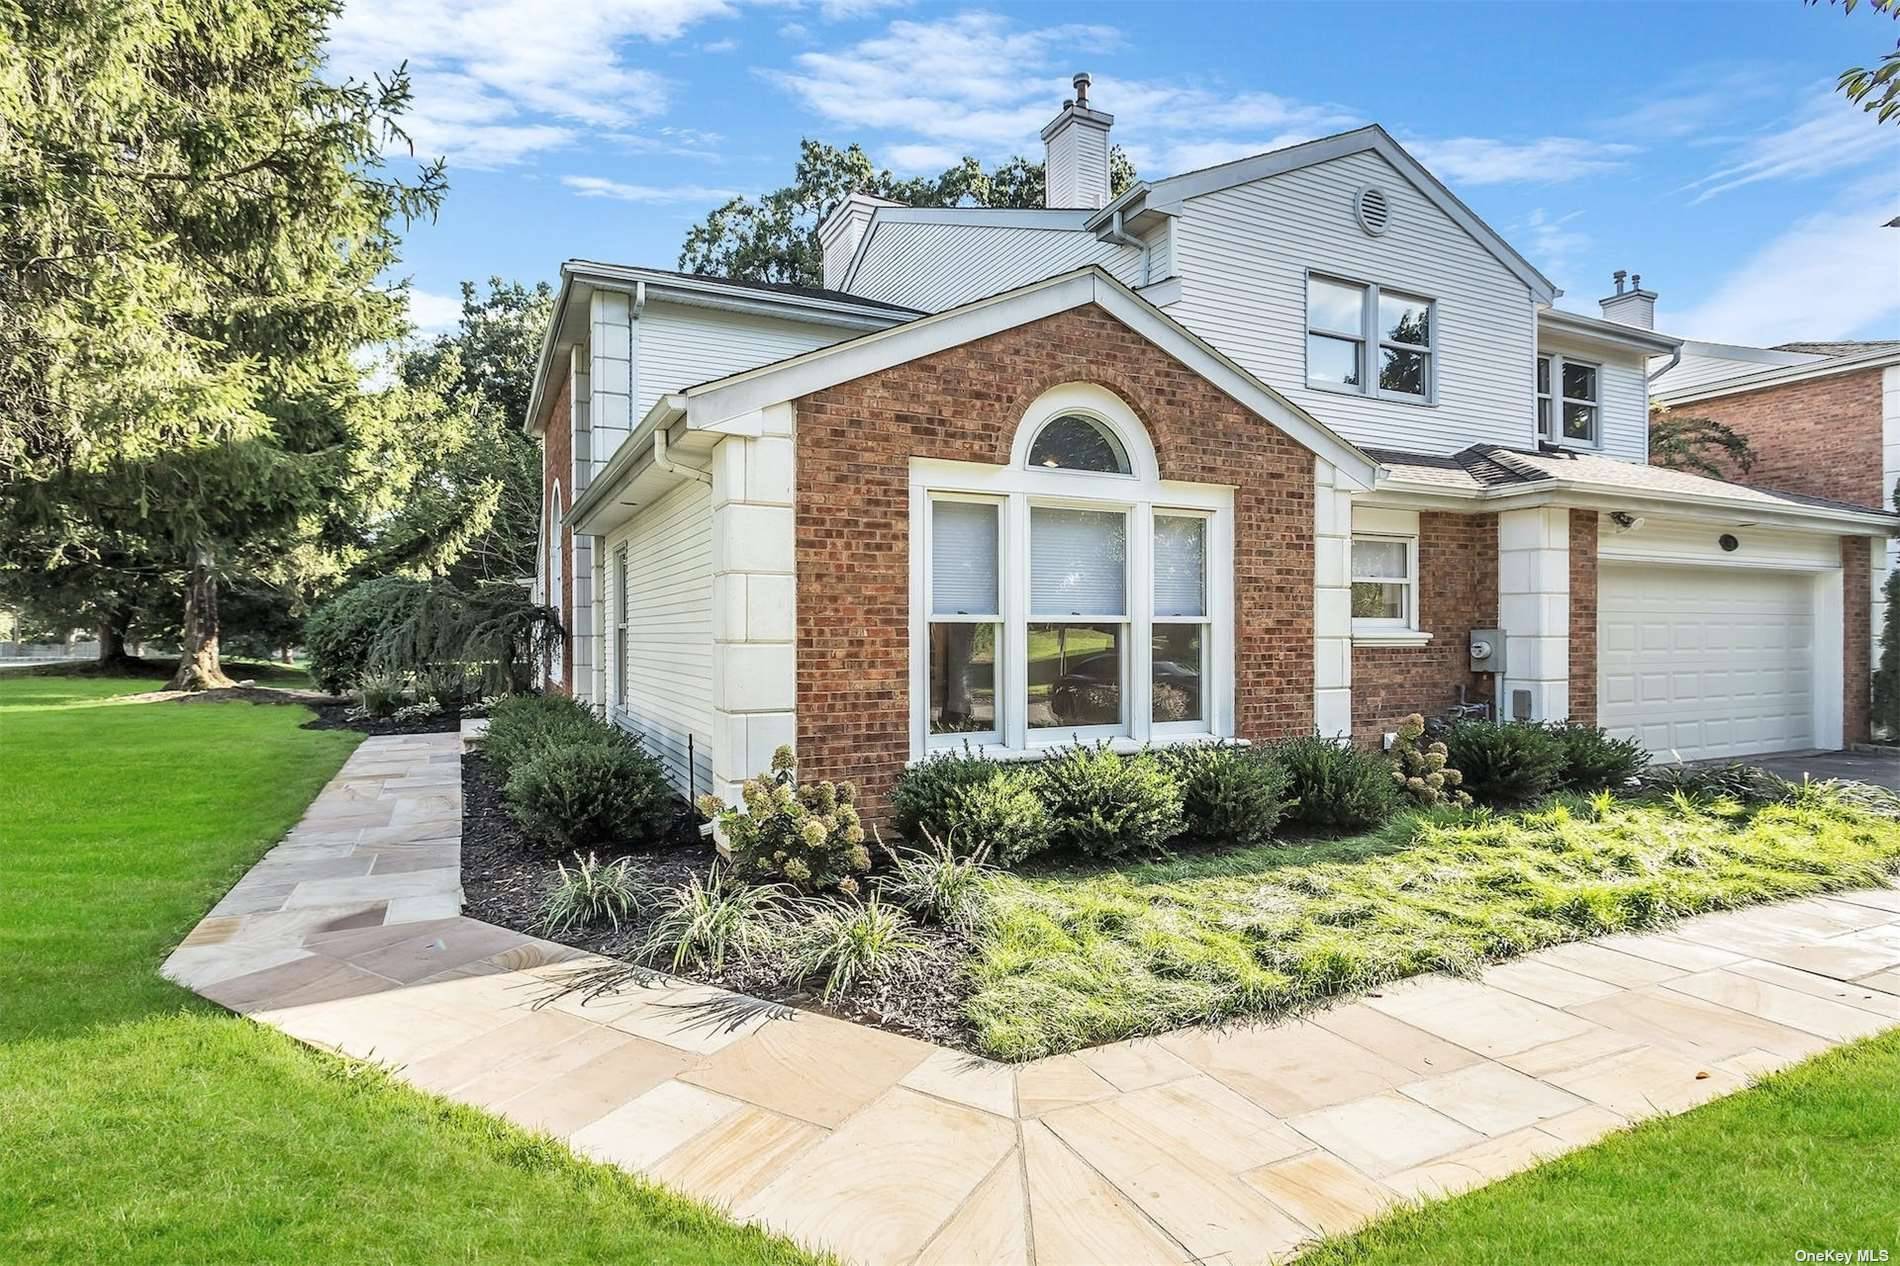 This rare and not often on the market Turnberry model, with a primary on the main, has been meticulously renovated top to bottom with luxury detail.